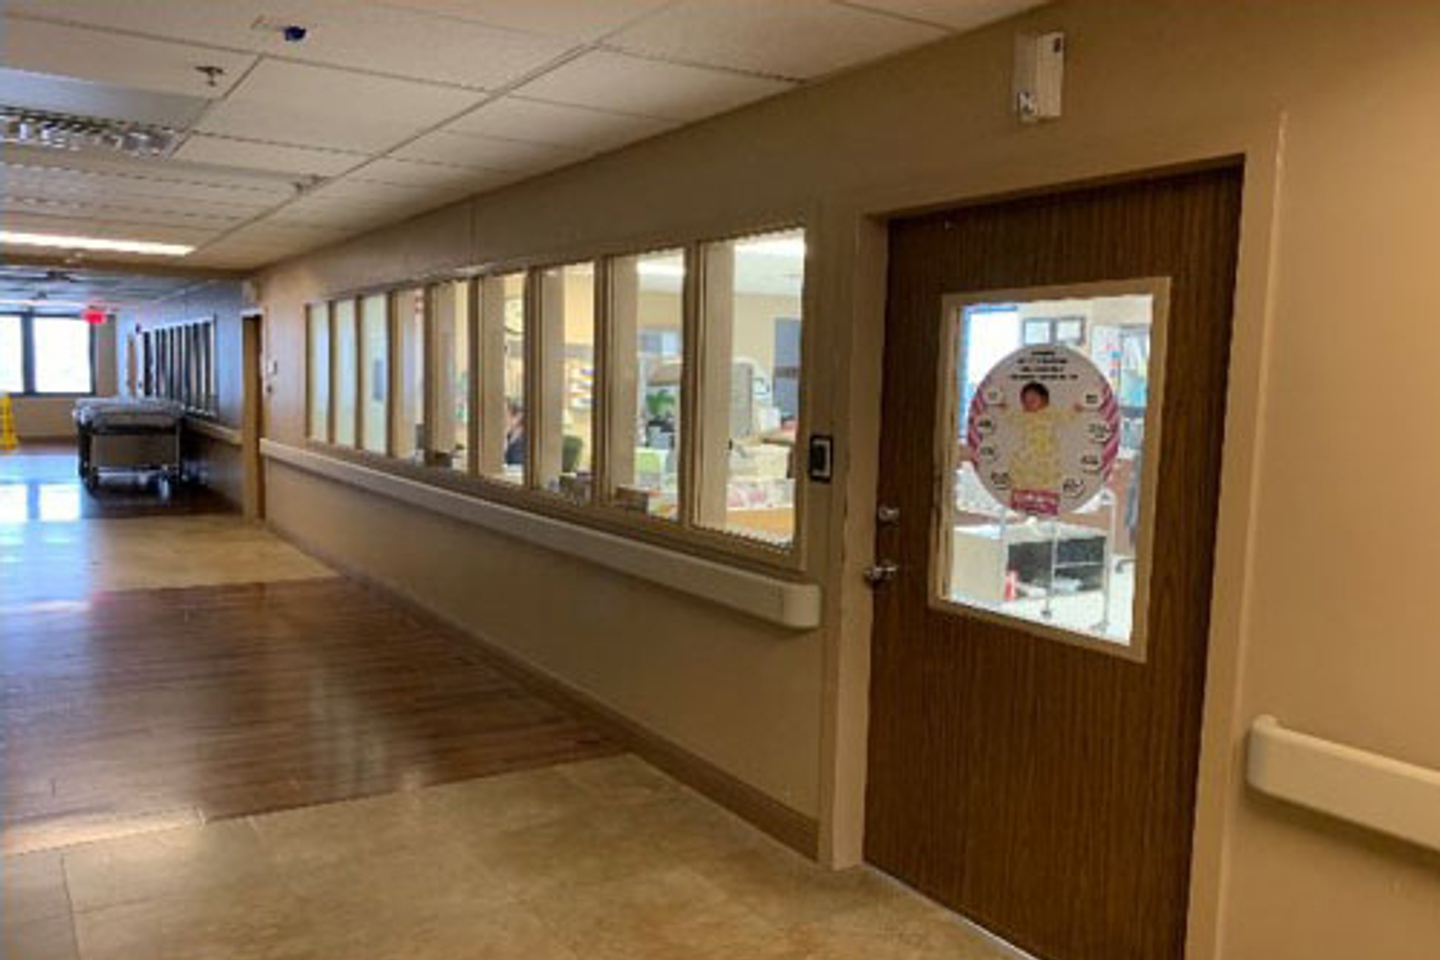 A view from the hallway of the nursery at TriStar Centennial Women's Hospital